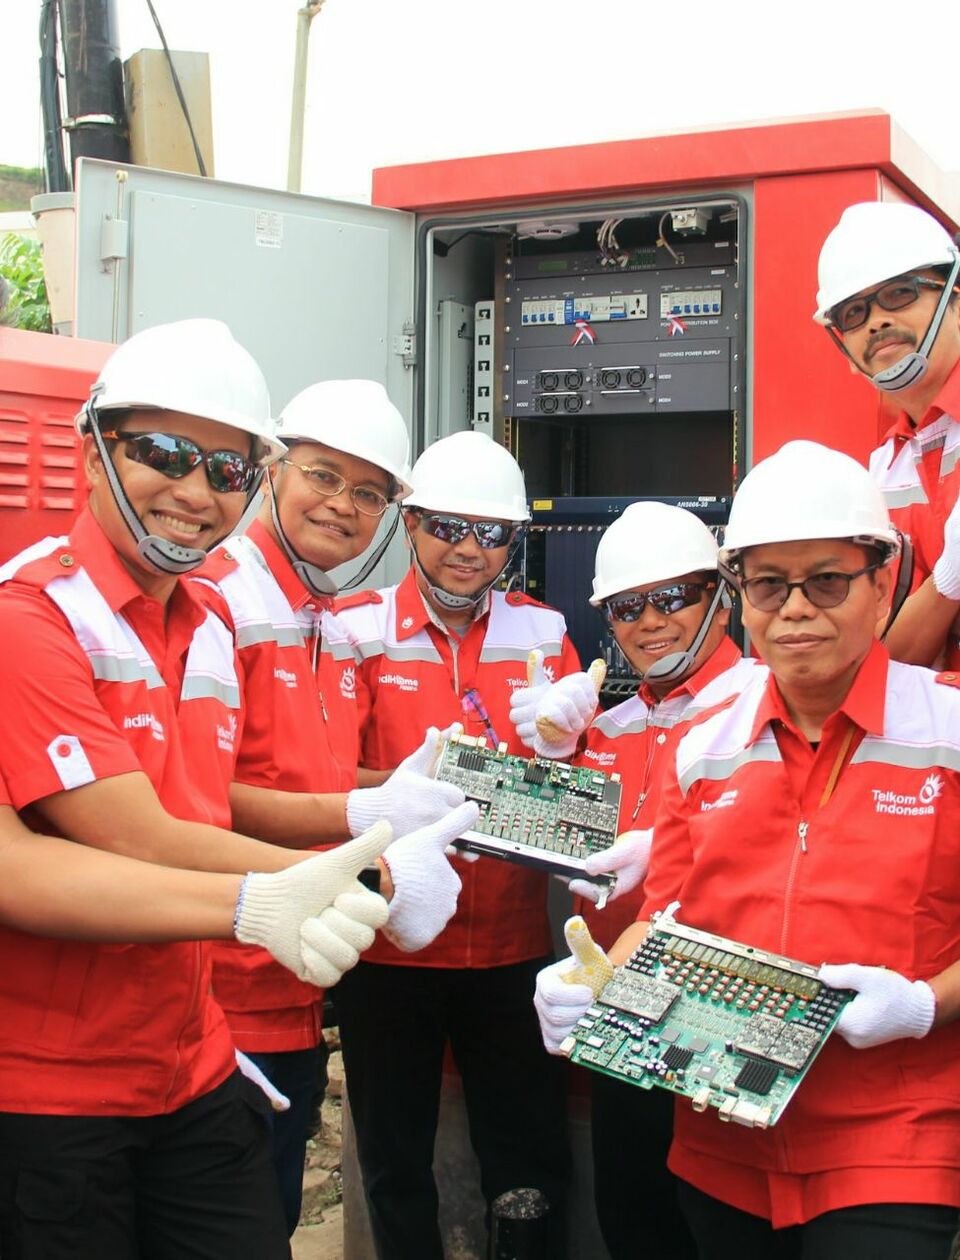 Telkom Network & IT Solutions Director Zulhelfi Abidin (second from left) after shutting down MSAN device as sign of completion of ICT network modernization process to 100% Fiber Optics in Cilegon city on Thursday (14/12).